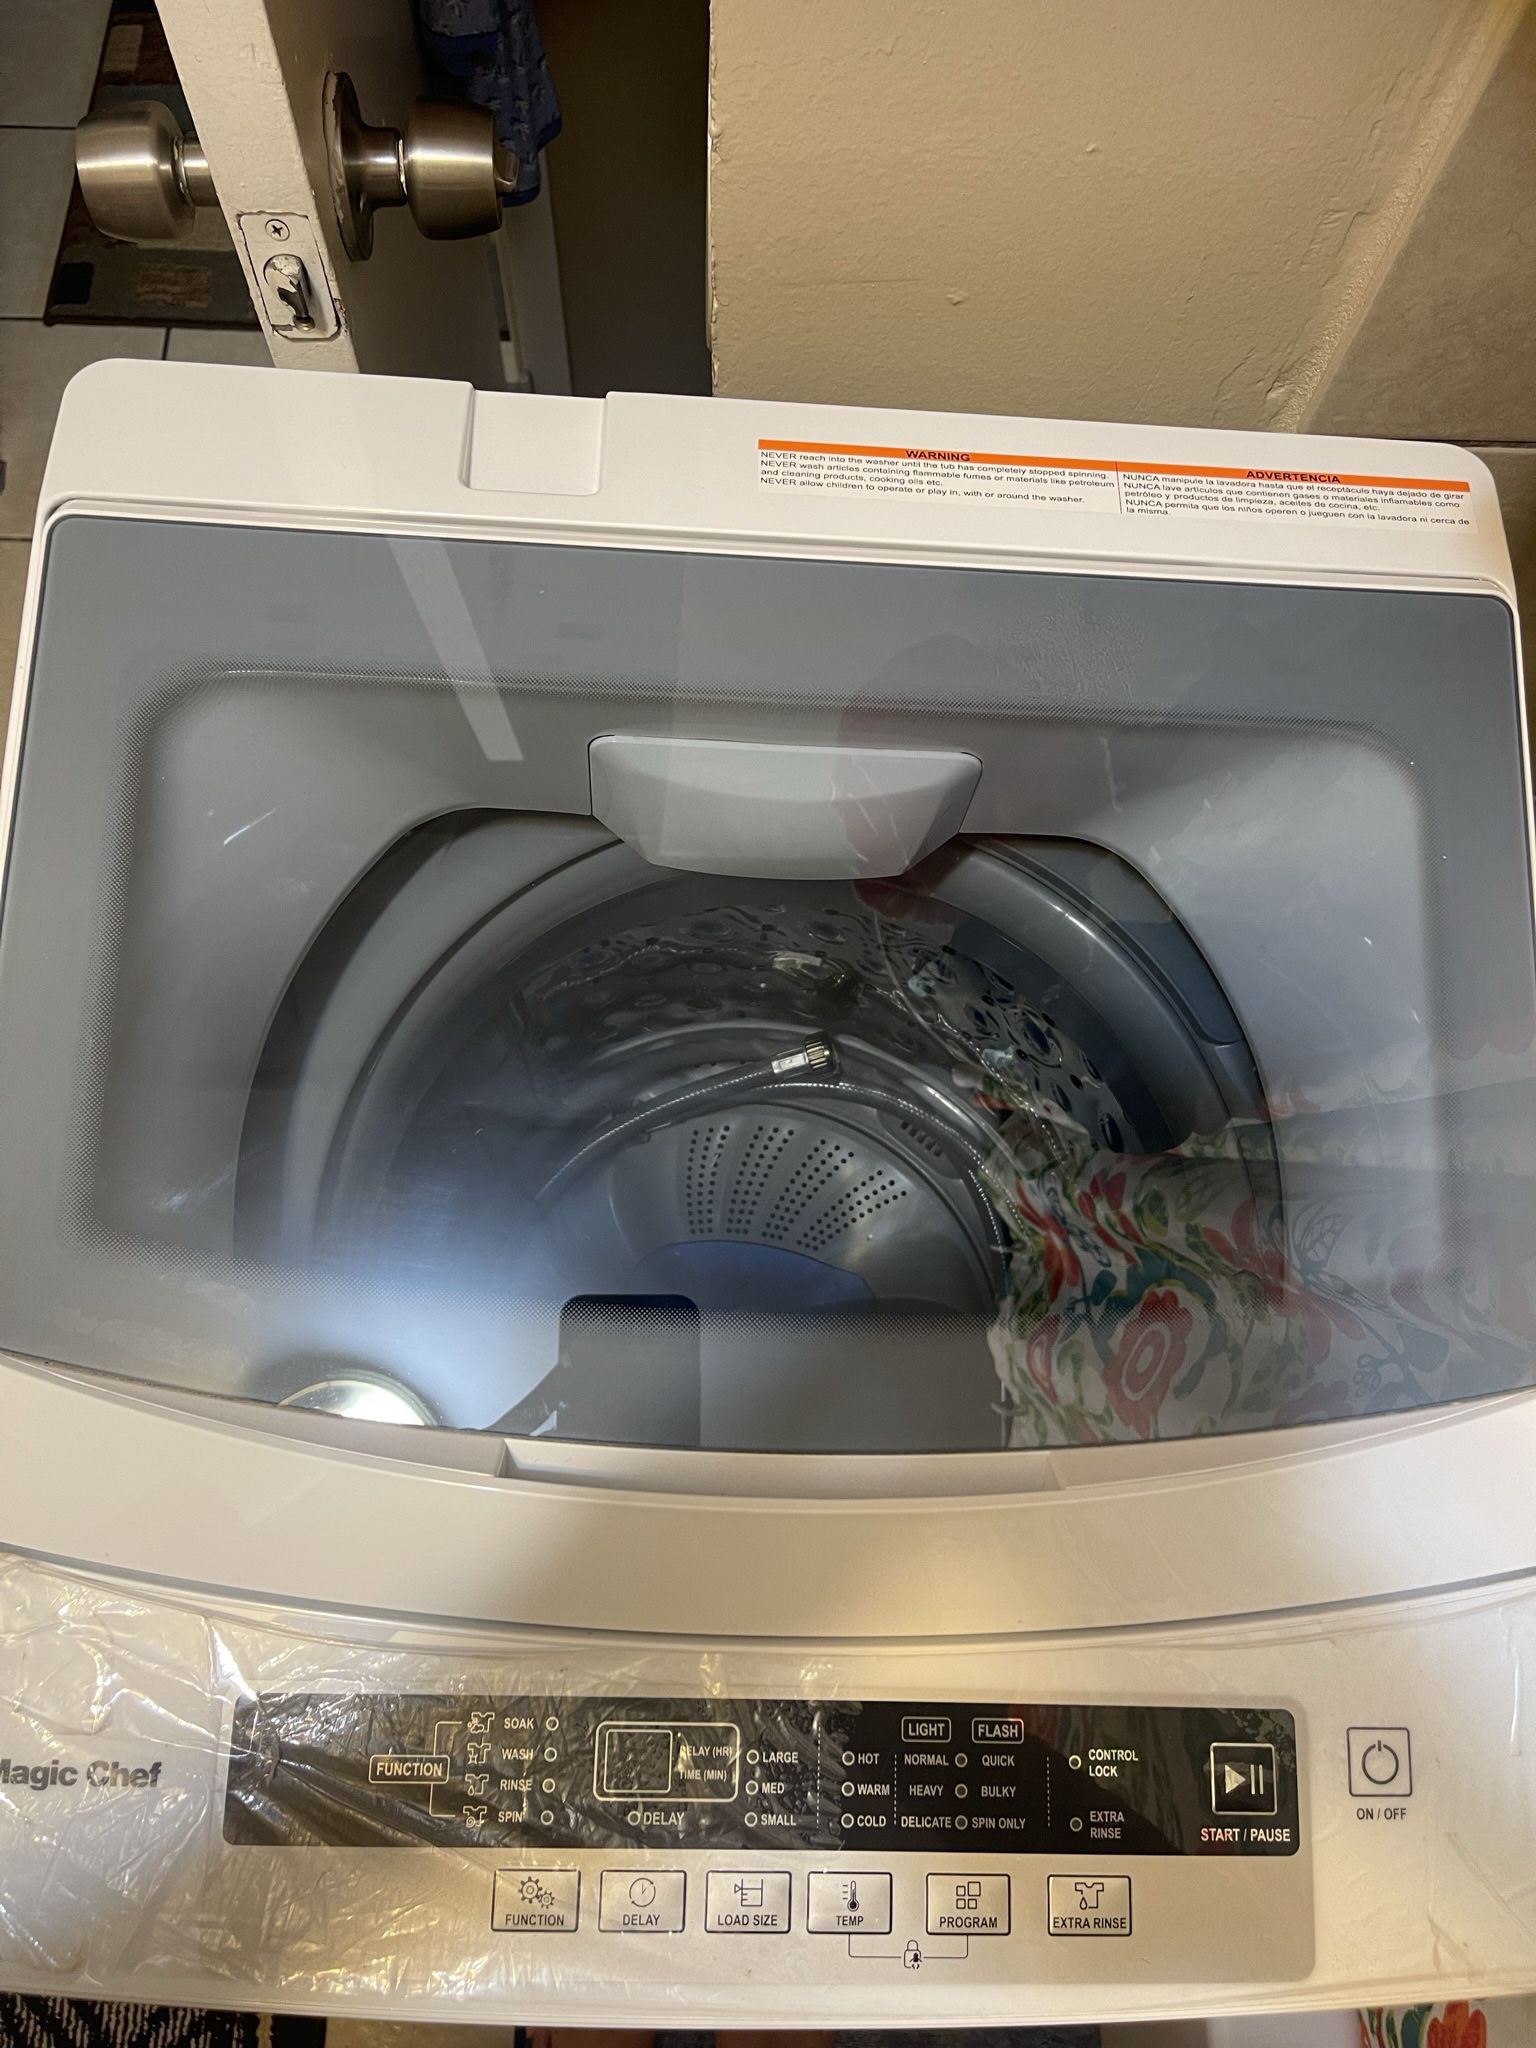 Magic Chef Portable Washer And Dryer Set $550 for Sale in Hollywood, FL -  OfferUp